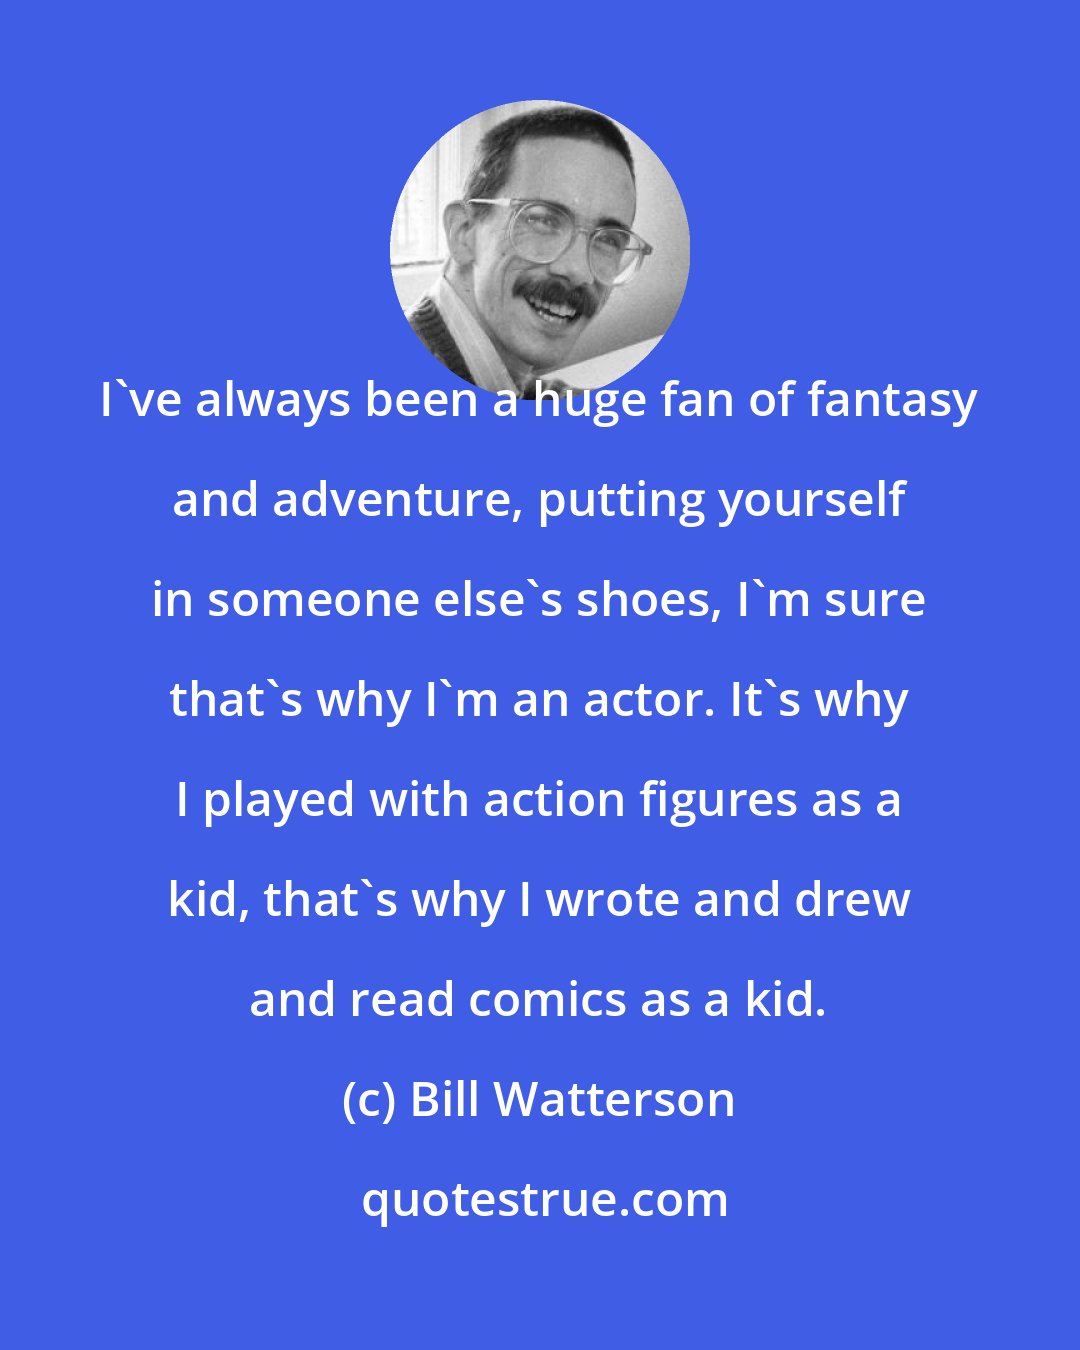 Bill Watterson: I've always been a huge fan of fantasy and adventure, putting yourself in someone else's shoes, I'm sure that's why I'm an actor. It's why I played with action figures as a kid, that's why I wrote and drew and read comics as a kid.